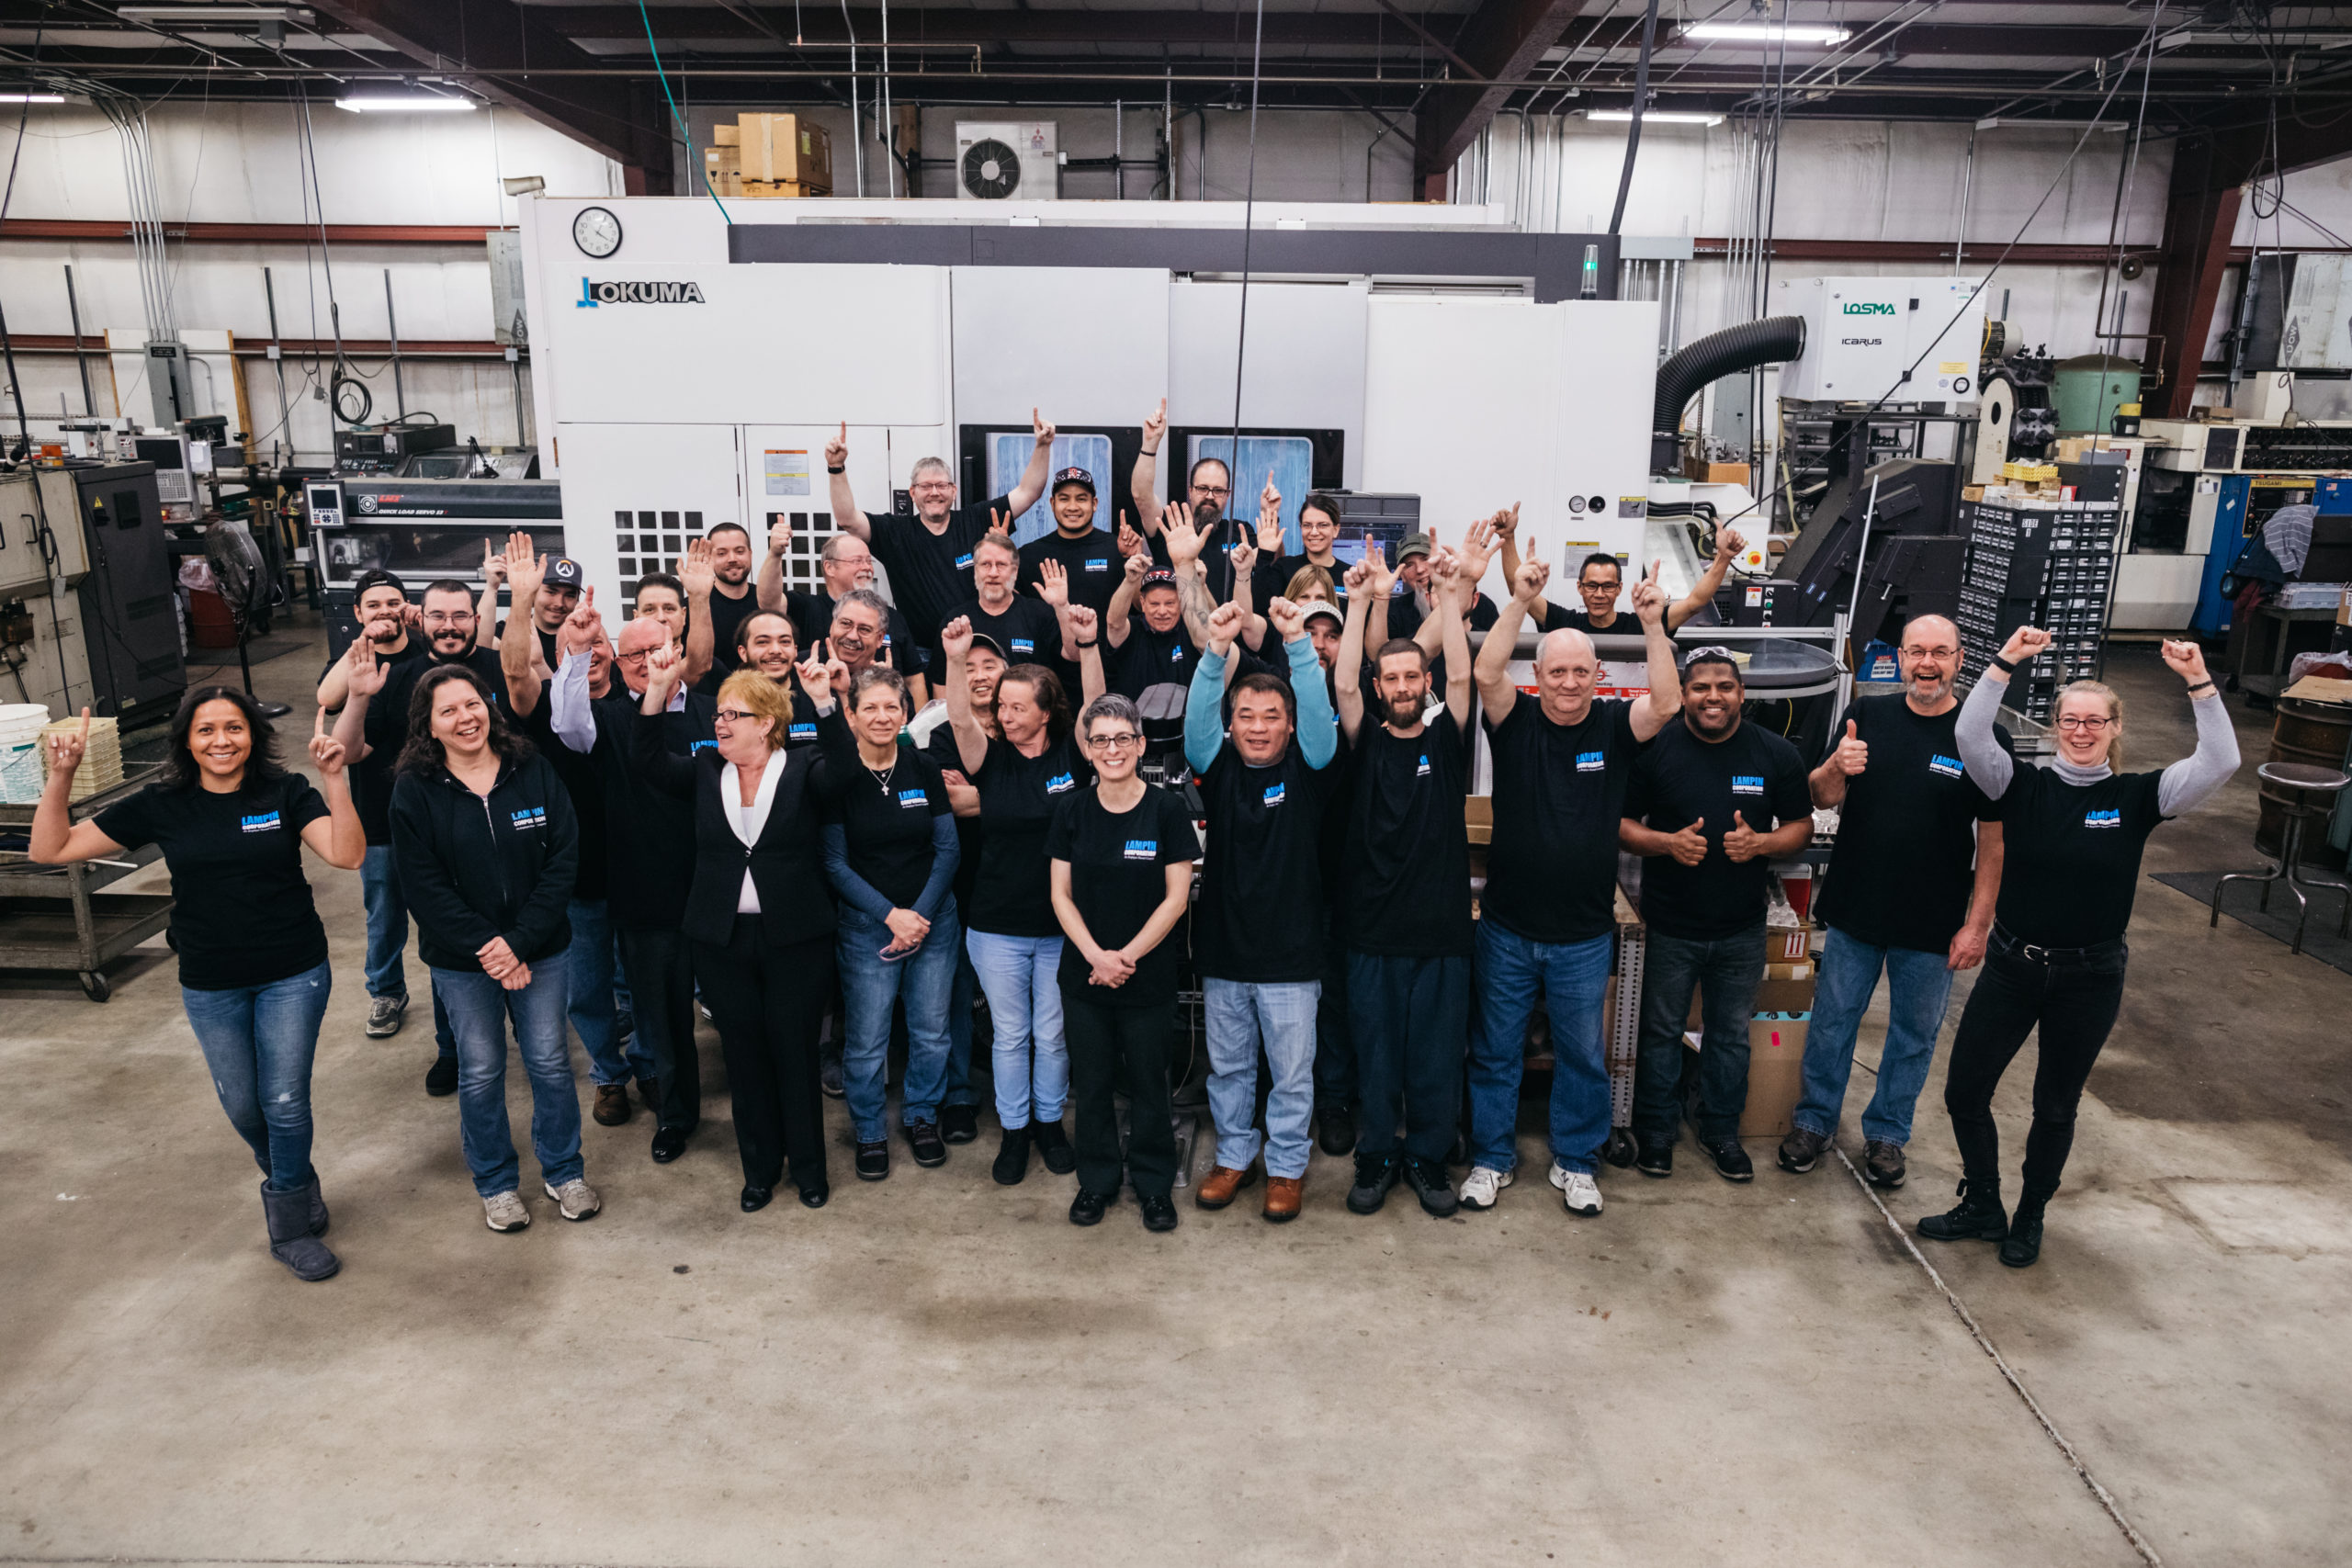 Lampin's employee owners are gathered in front of a machine with their hands raised in the air to express joy.